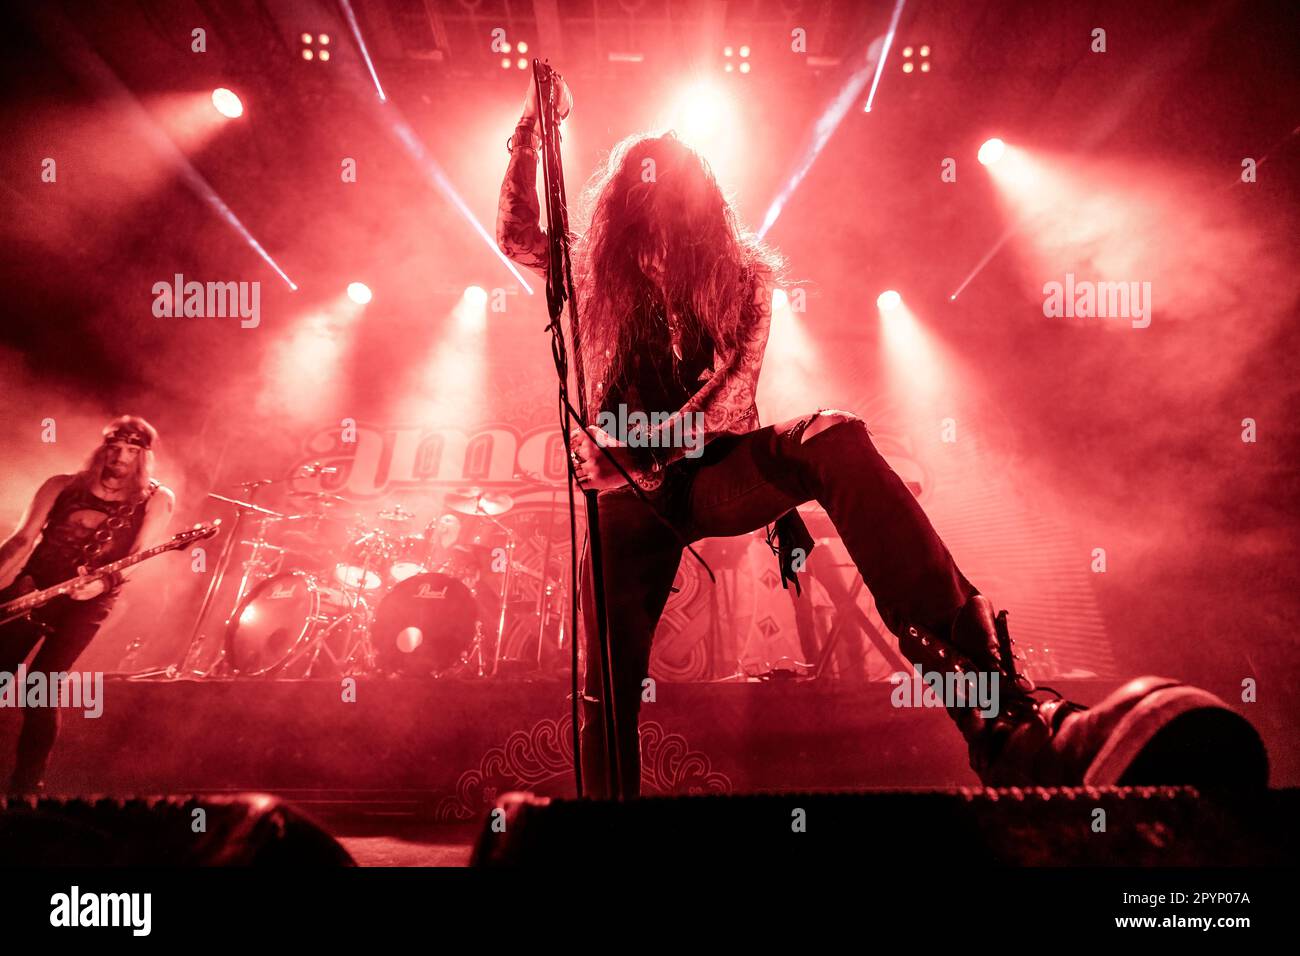 Oslo, Norway. 07th, April 2023. The Finnish heavy metal band Amorphis performs a live concert at Rockefeller during the Norwegian metal festival Inferno Metal Festival 2023 in Oslo. Here vocalist Tomi Joutsen is seen live on stage. (Photo credit: Gonzales Photo - Terje Dokken). Stock Photo